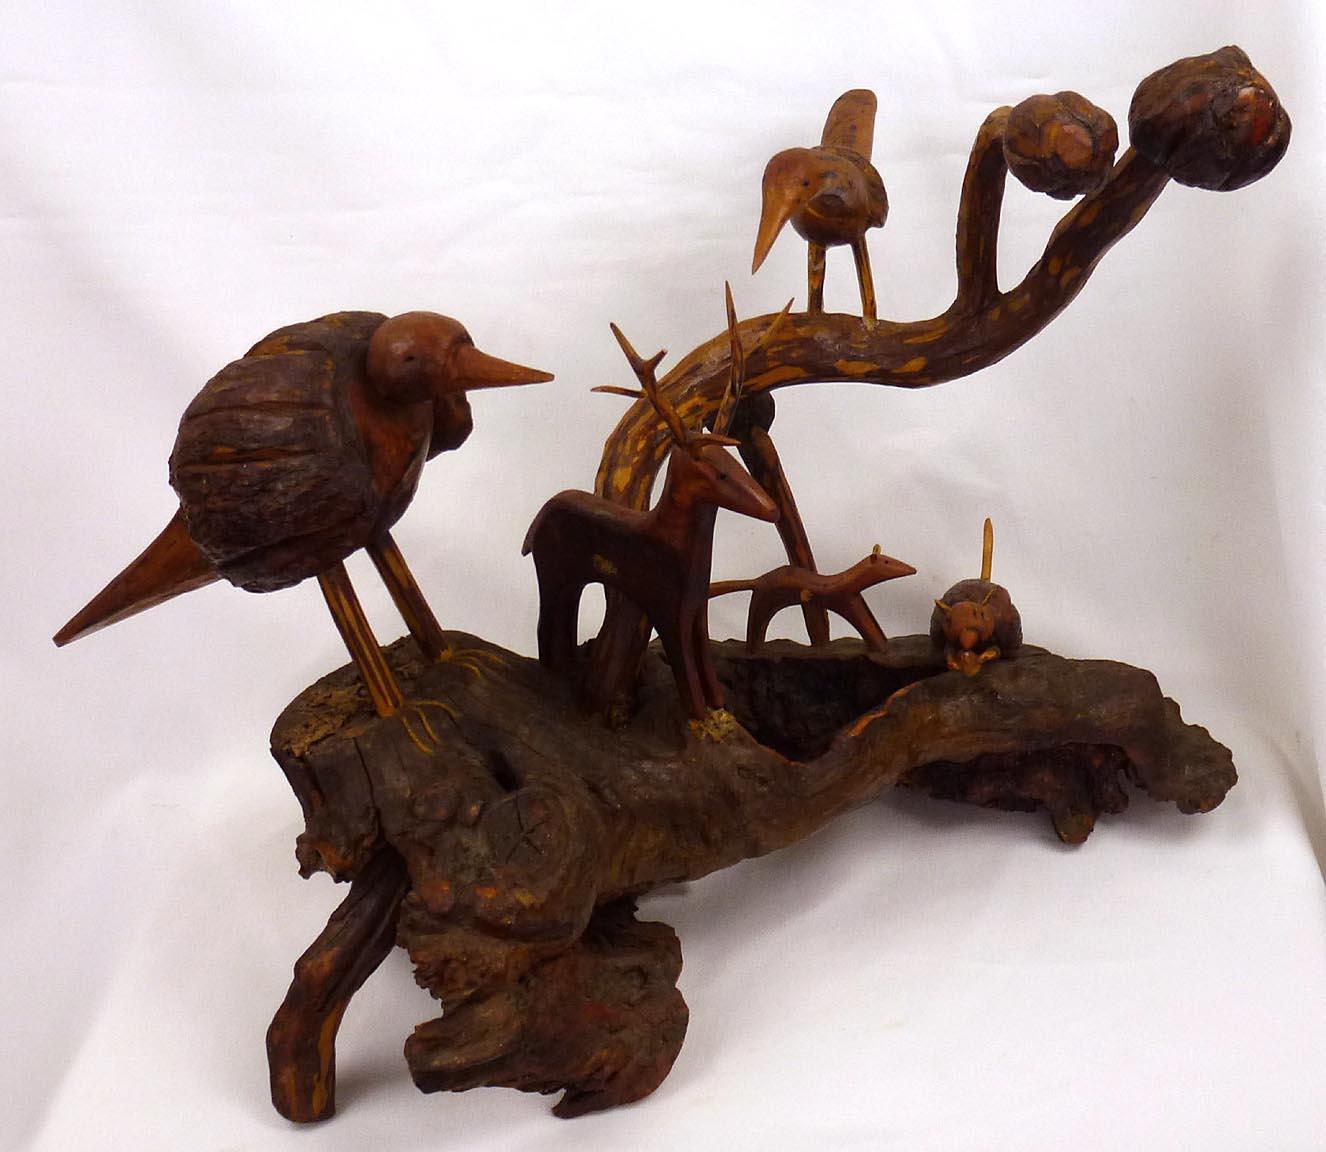 This is an assemblage of carved birds and animals by Russell Gillespie. The figures are carved from burls, branches, and wood, mounted on a larger root base. There are two birds, a deer with carved antlers, a squirrel with a nut, and another small